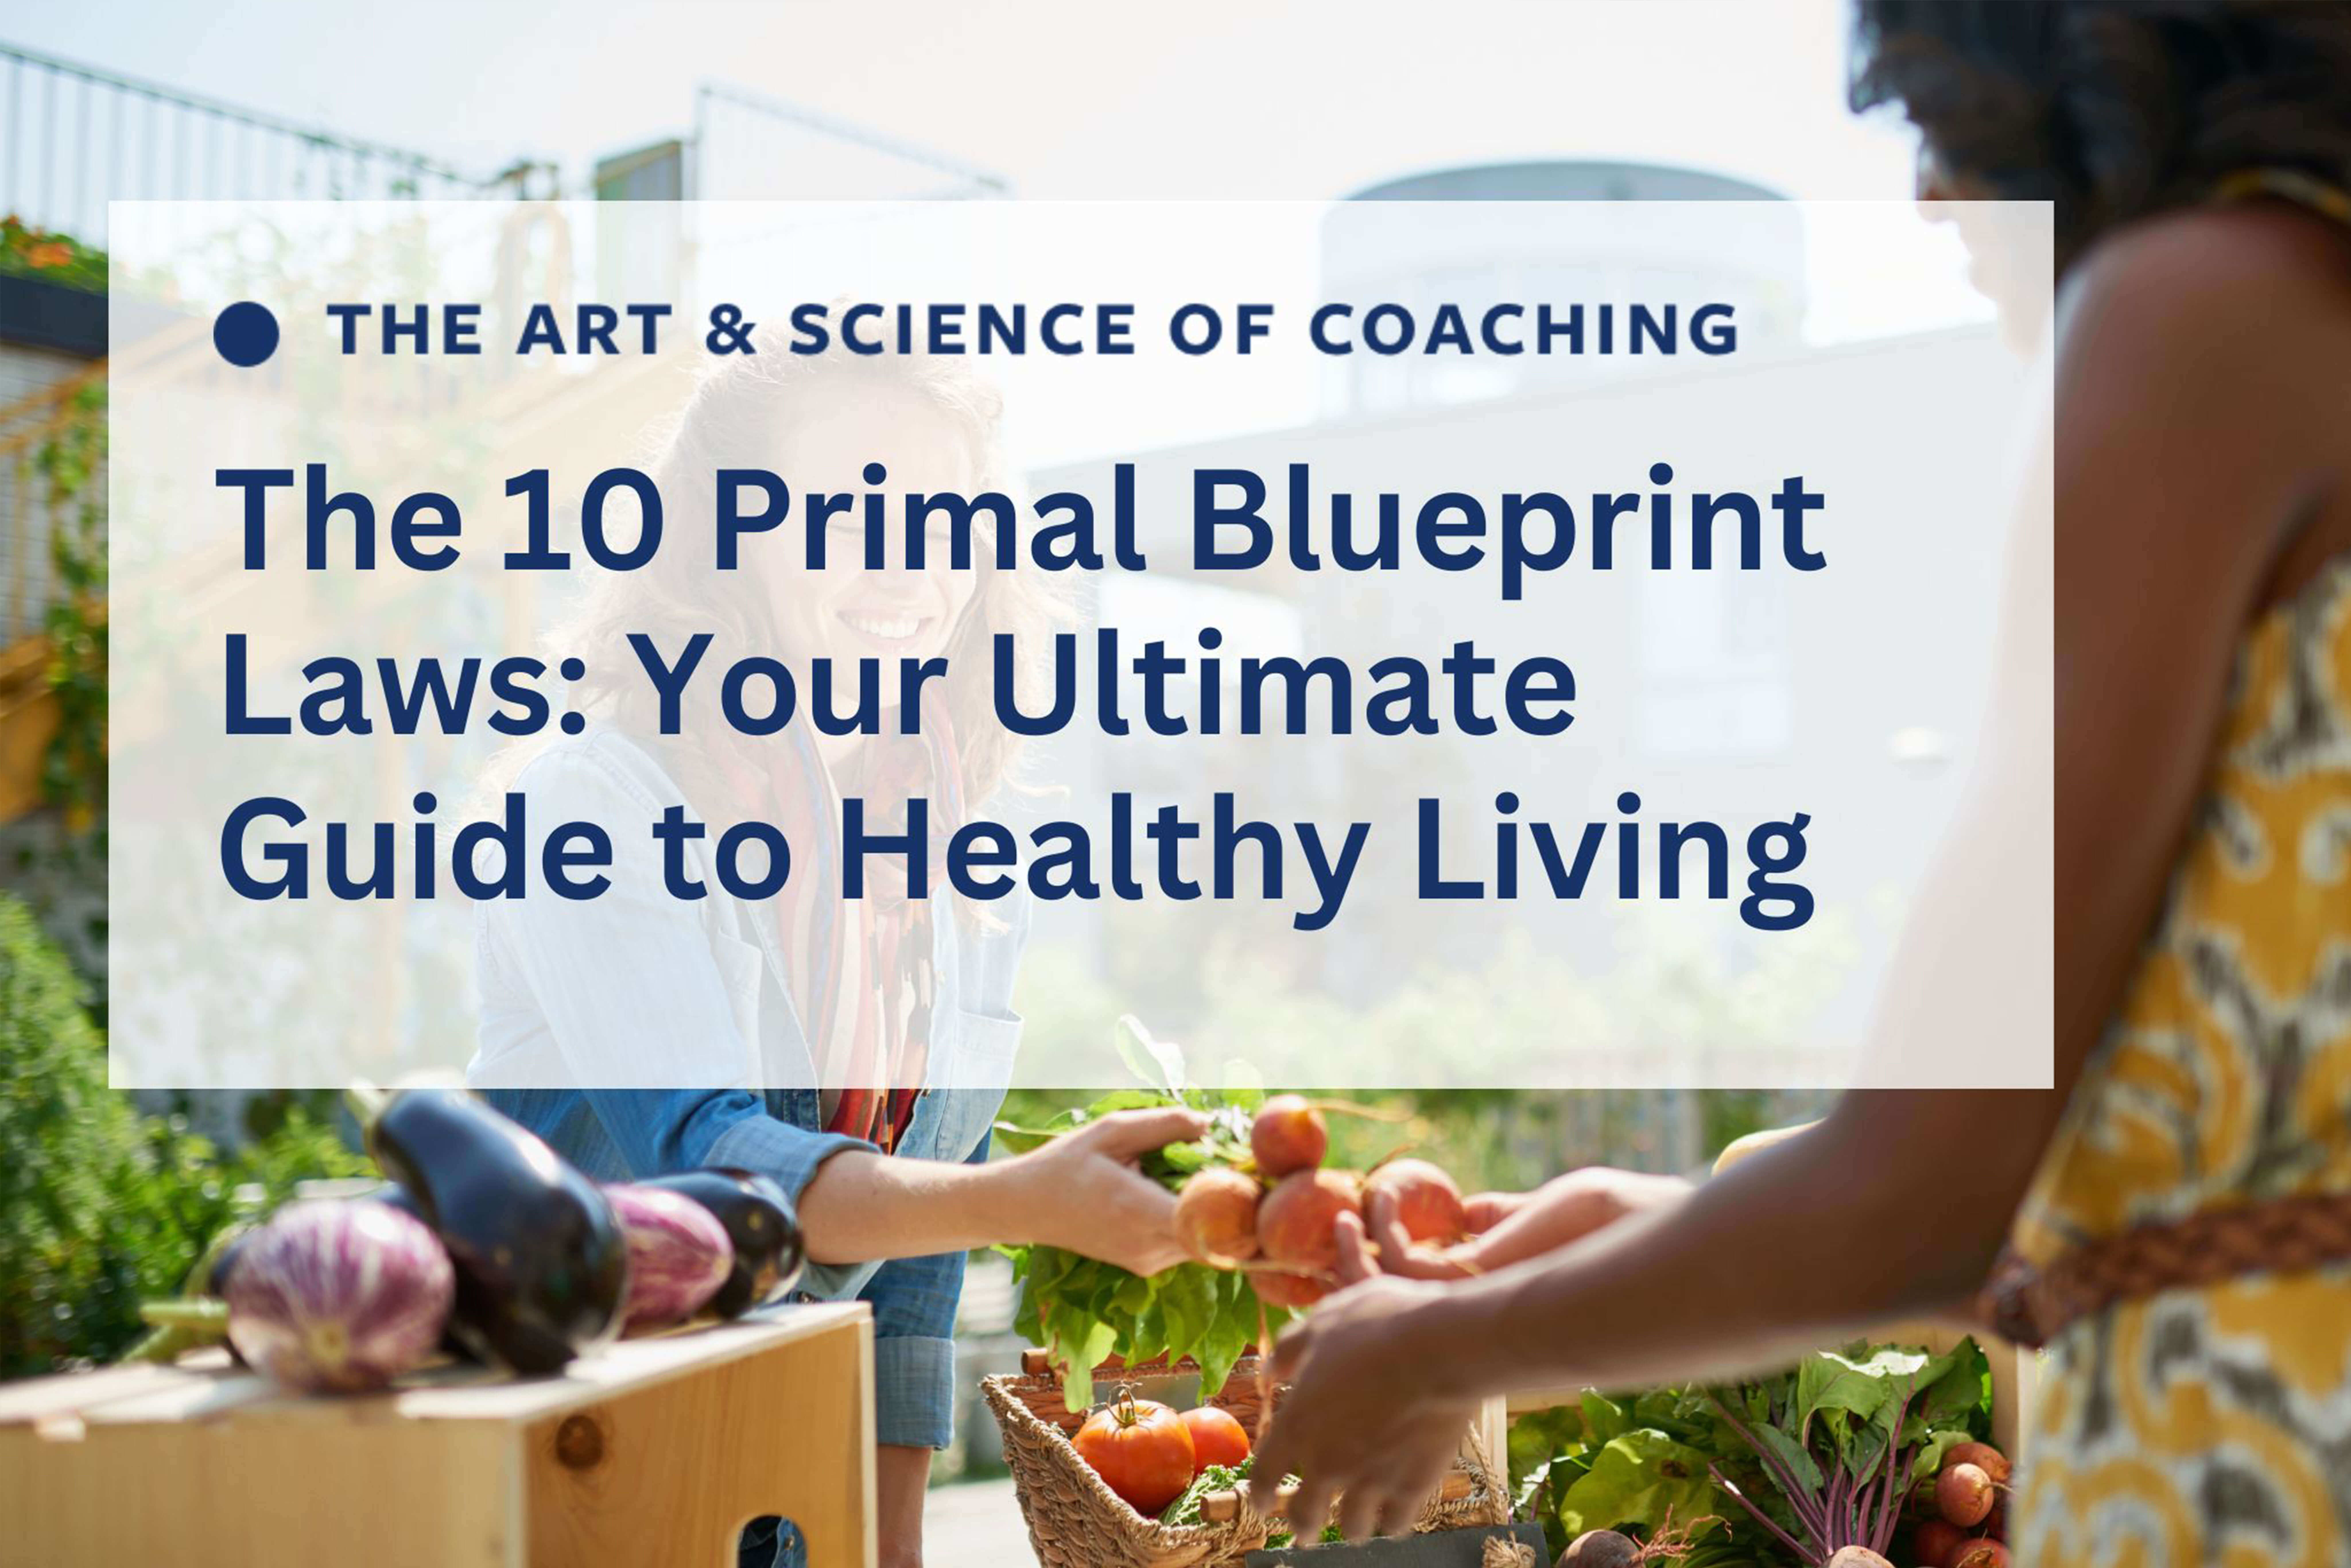 The 10 primal blueprint laws provide the ultimate guide to healthy living.